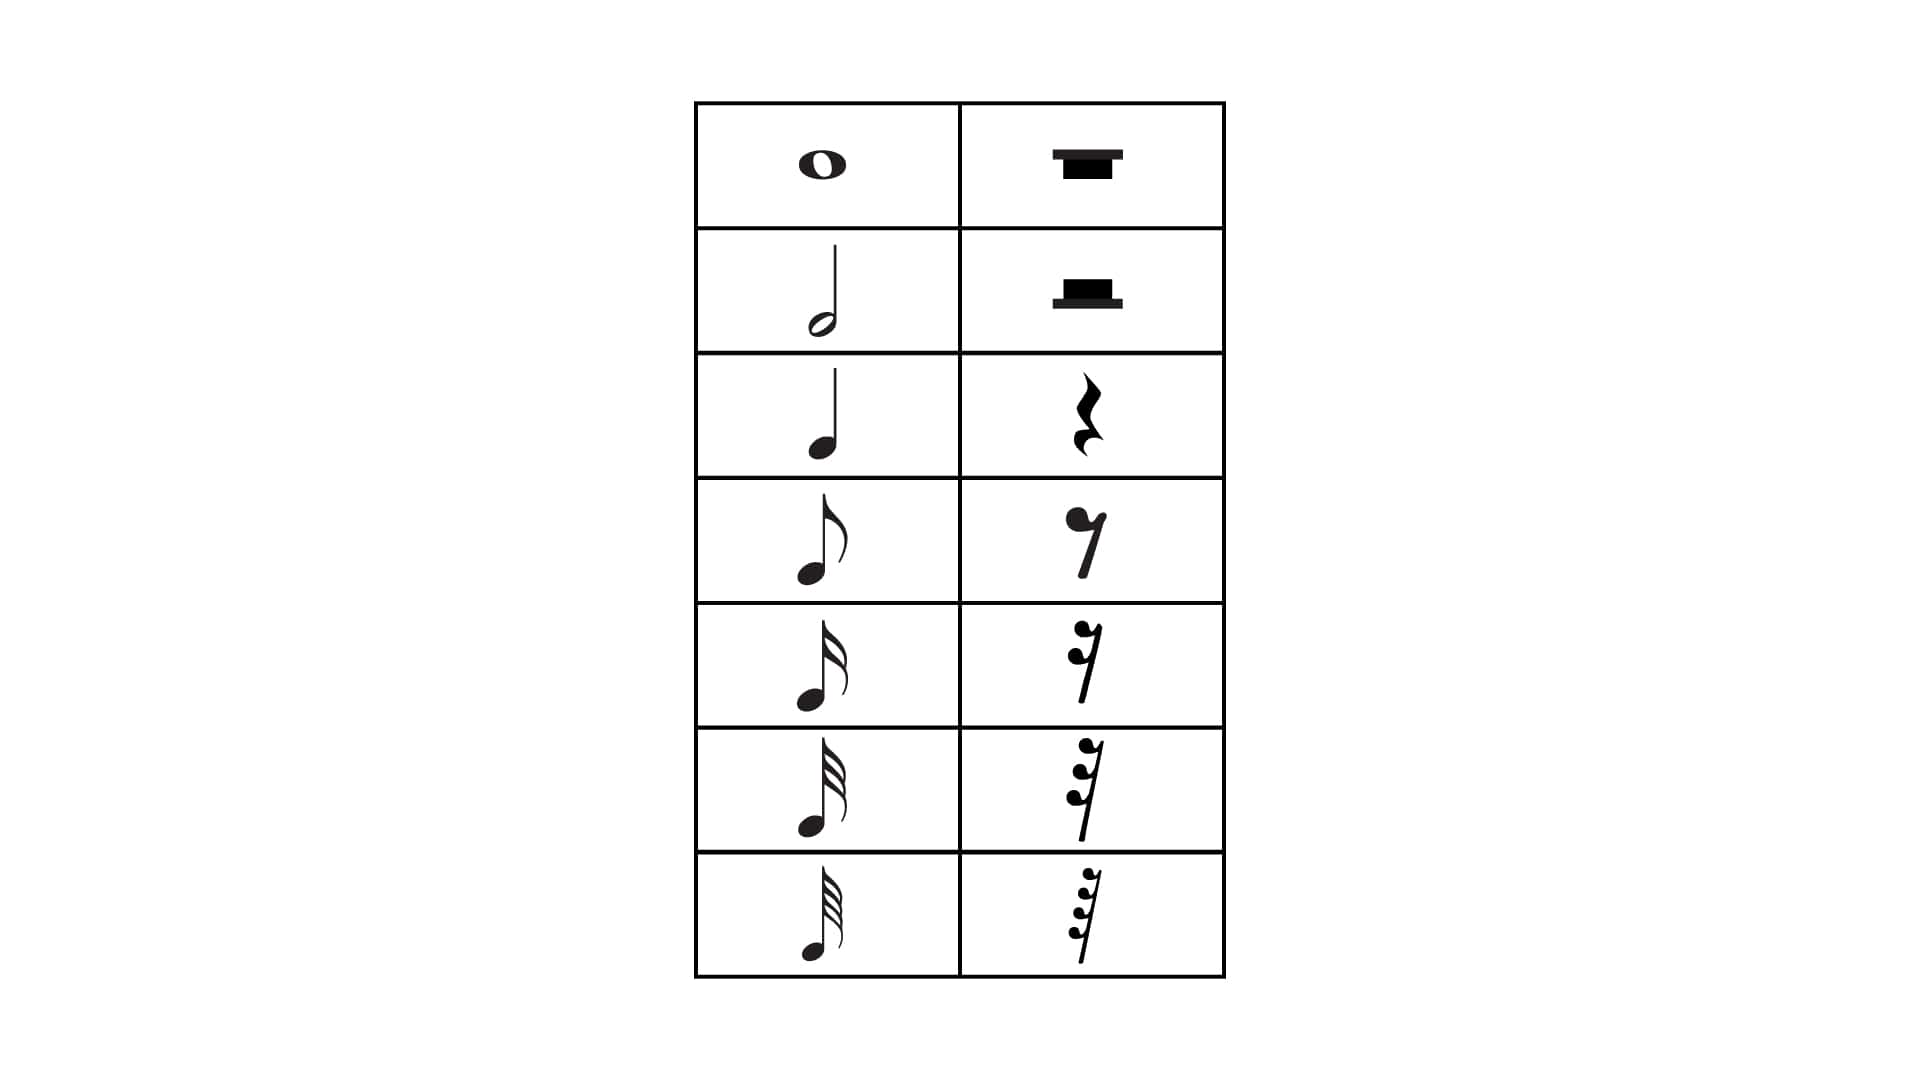 Music Notes And Rests Chart